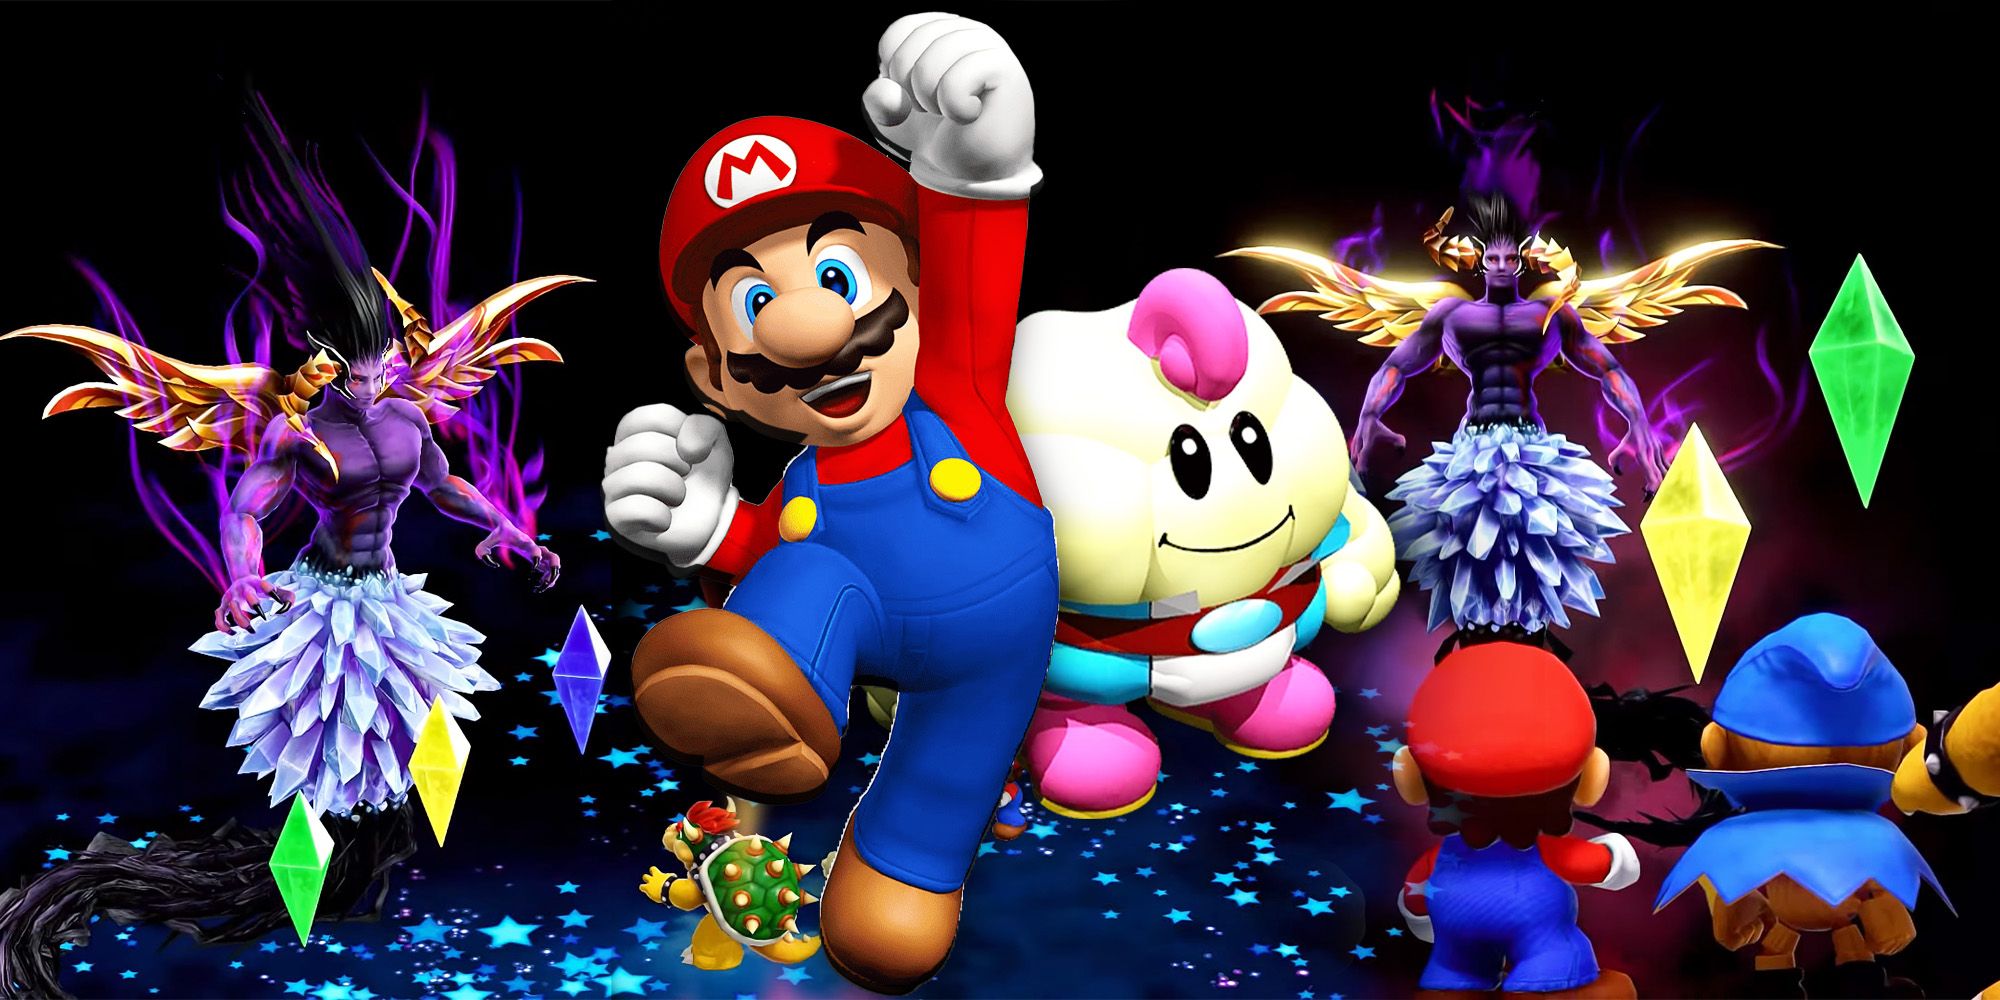 Mario jumps and Mallow smiles in the foreground, while Bowser, Mario, and Geno fight Culex 3D and his elemental crystals in the background of screenshots from Super Mario RPG.